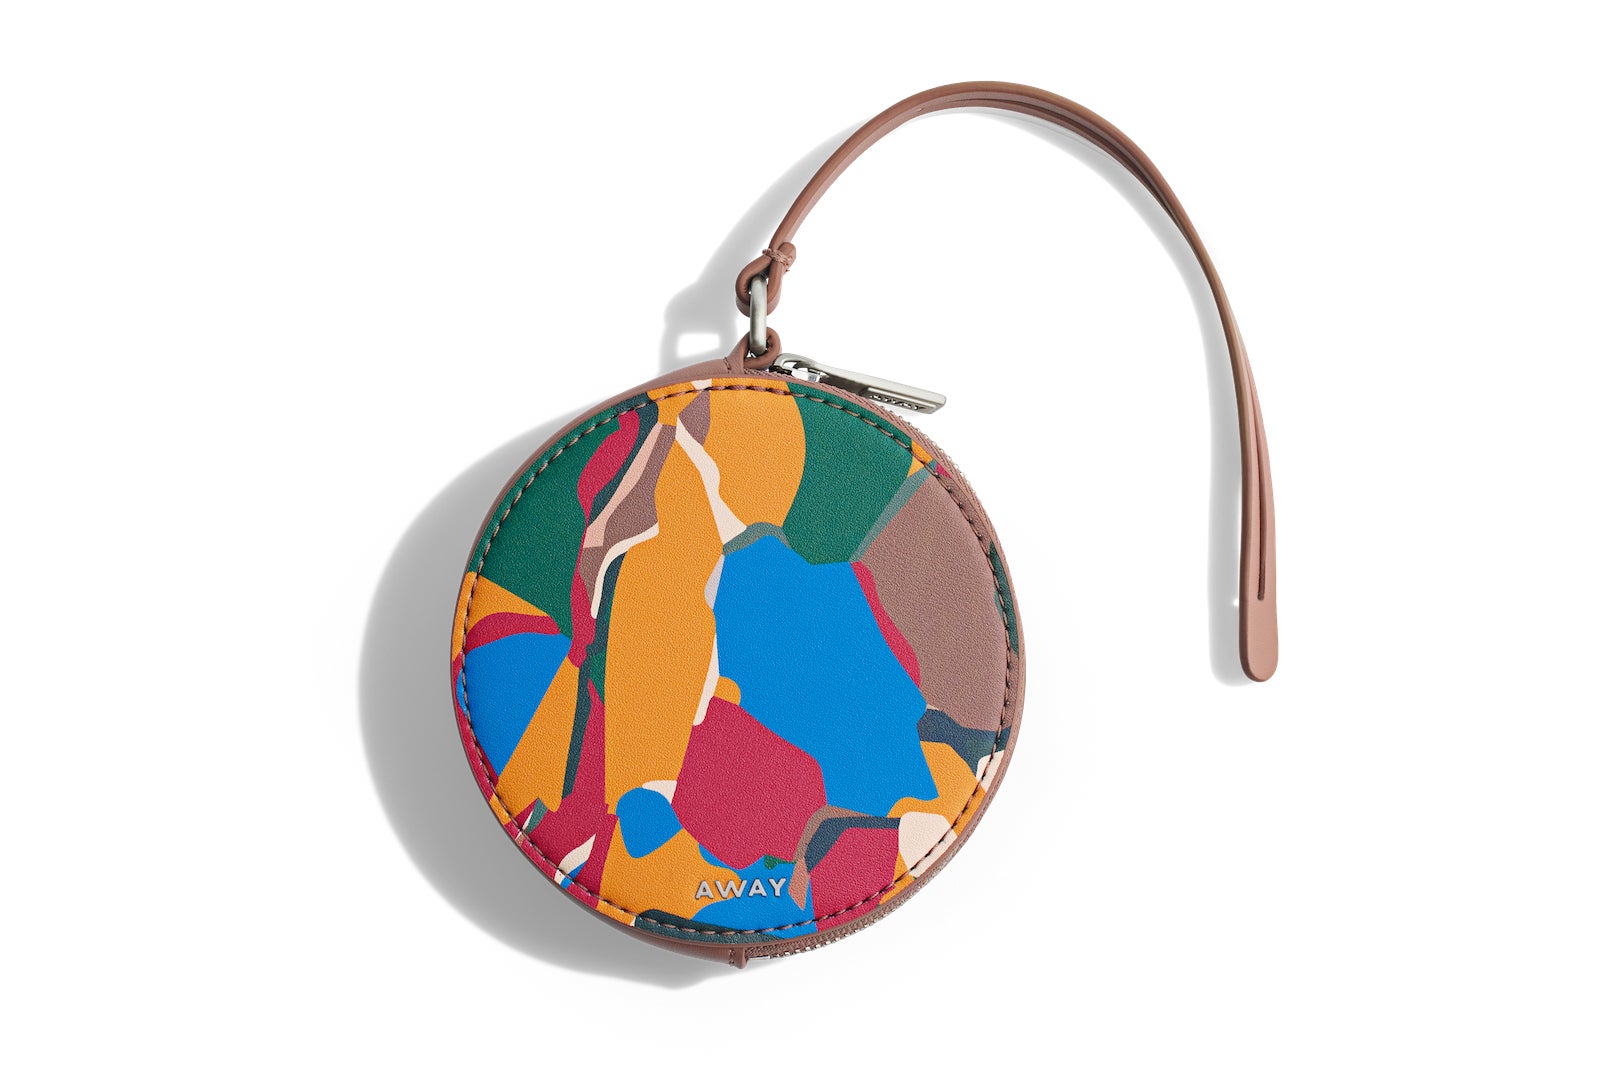 Away luggage tag alpine circle pouch